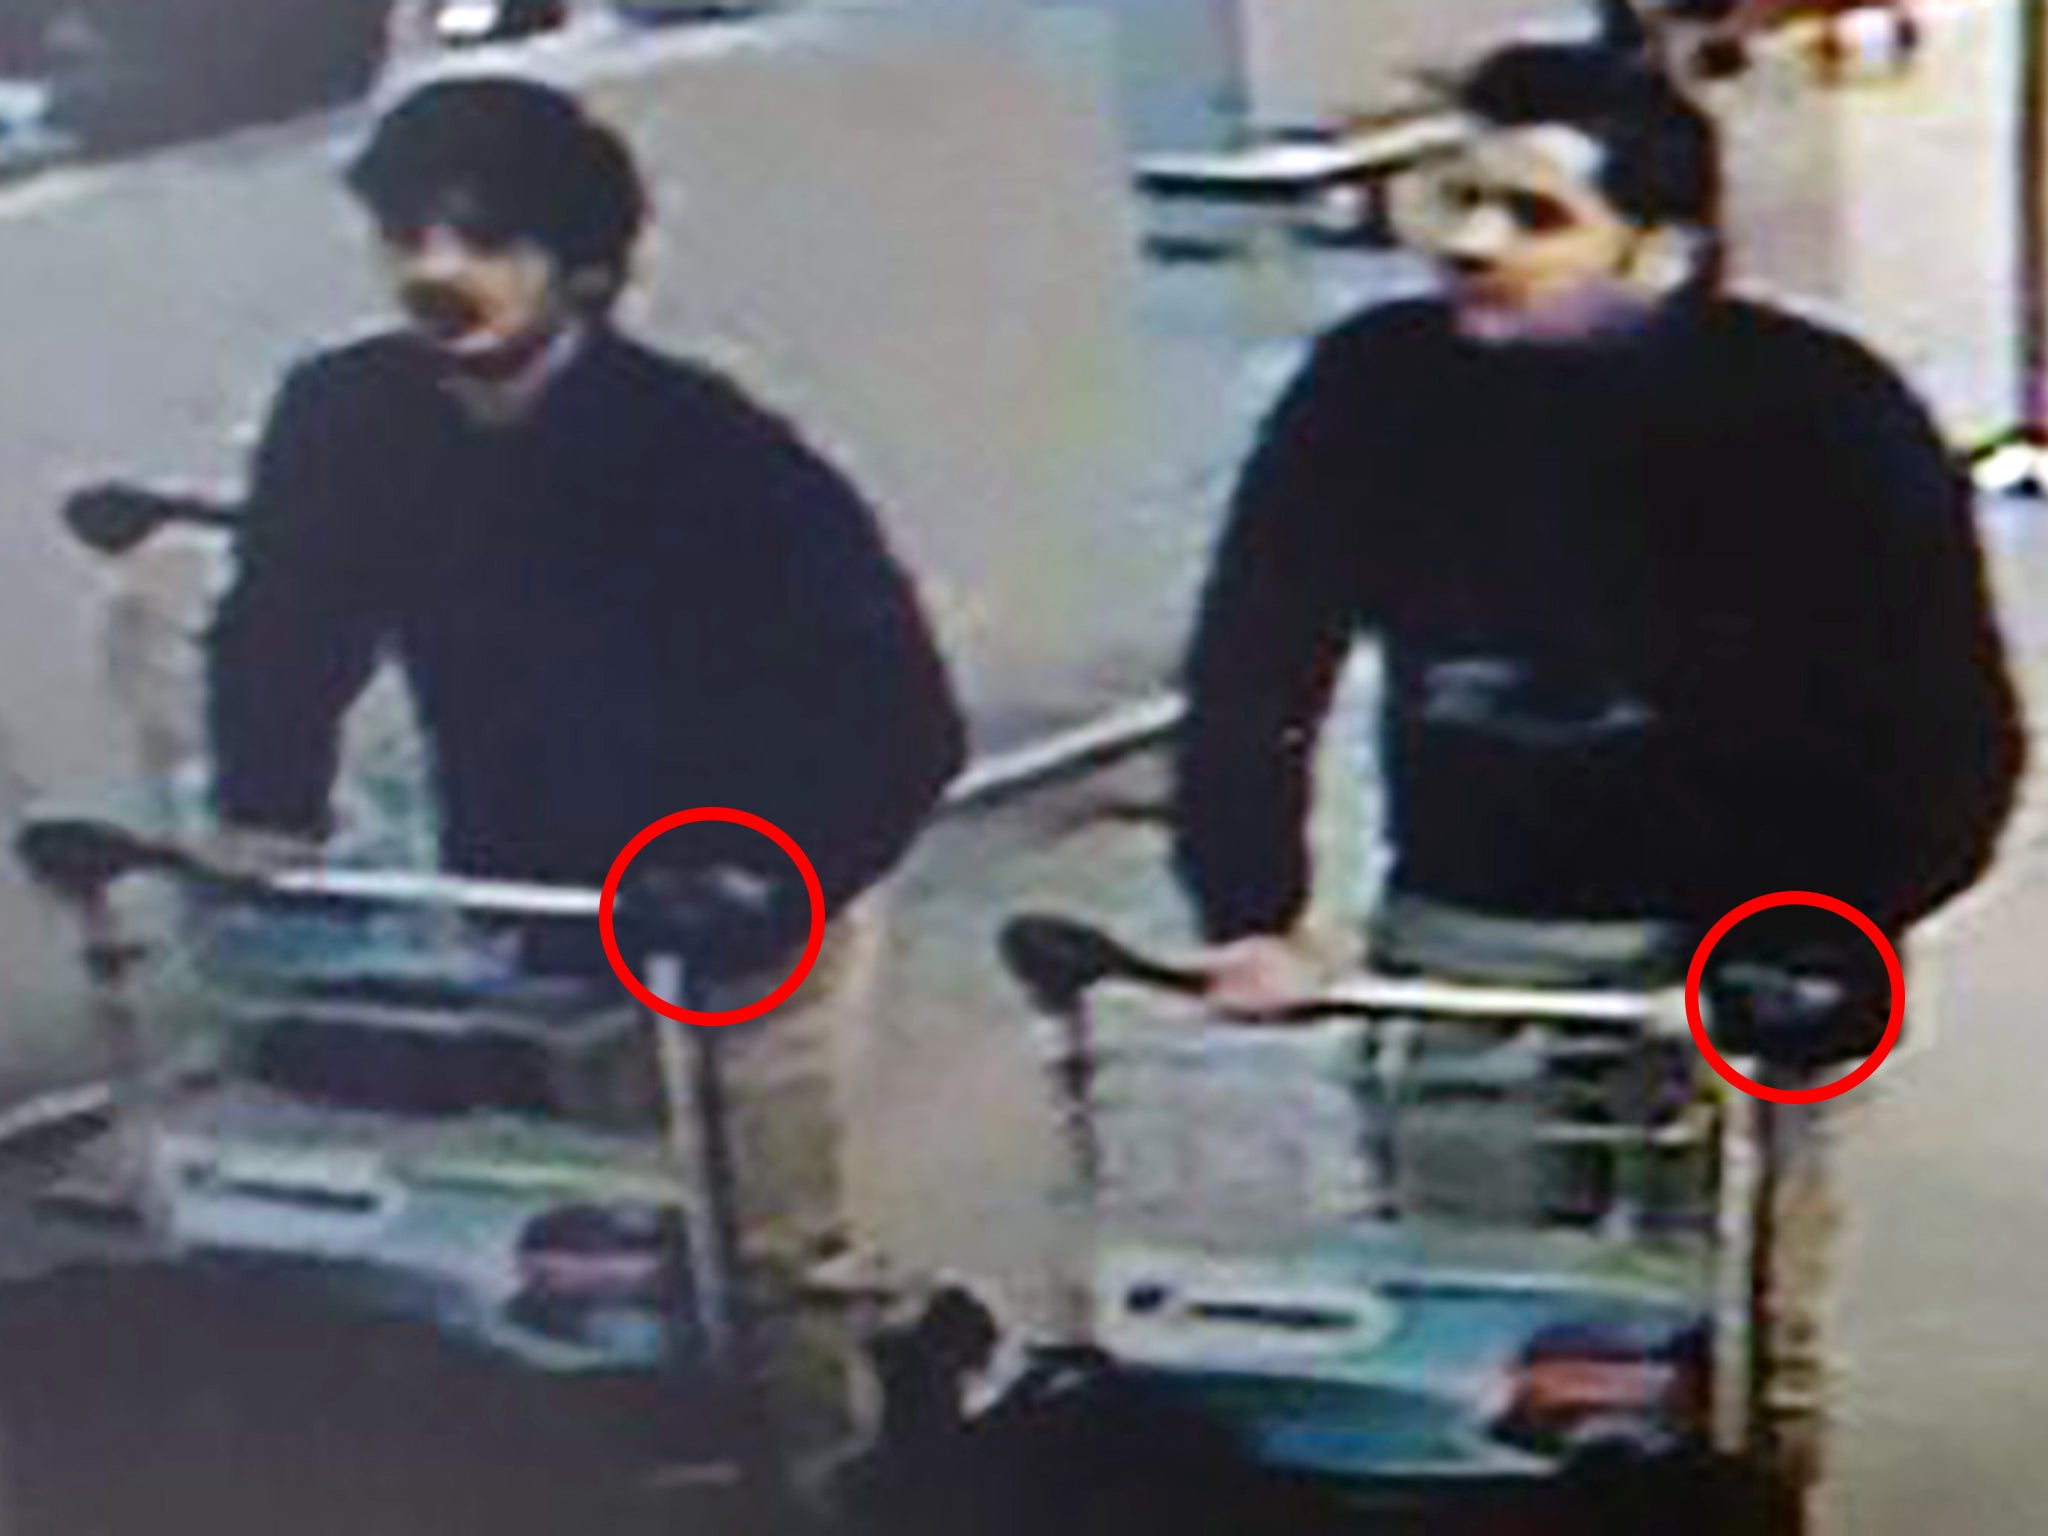 Both the suspected suicide bombers could be seen on airport CCTV wearing a glove on their left hands